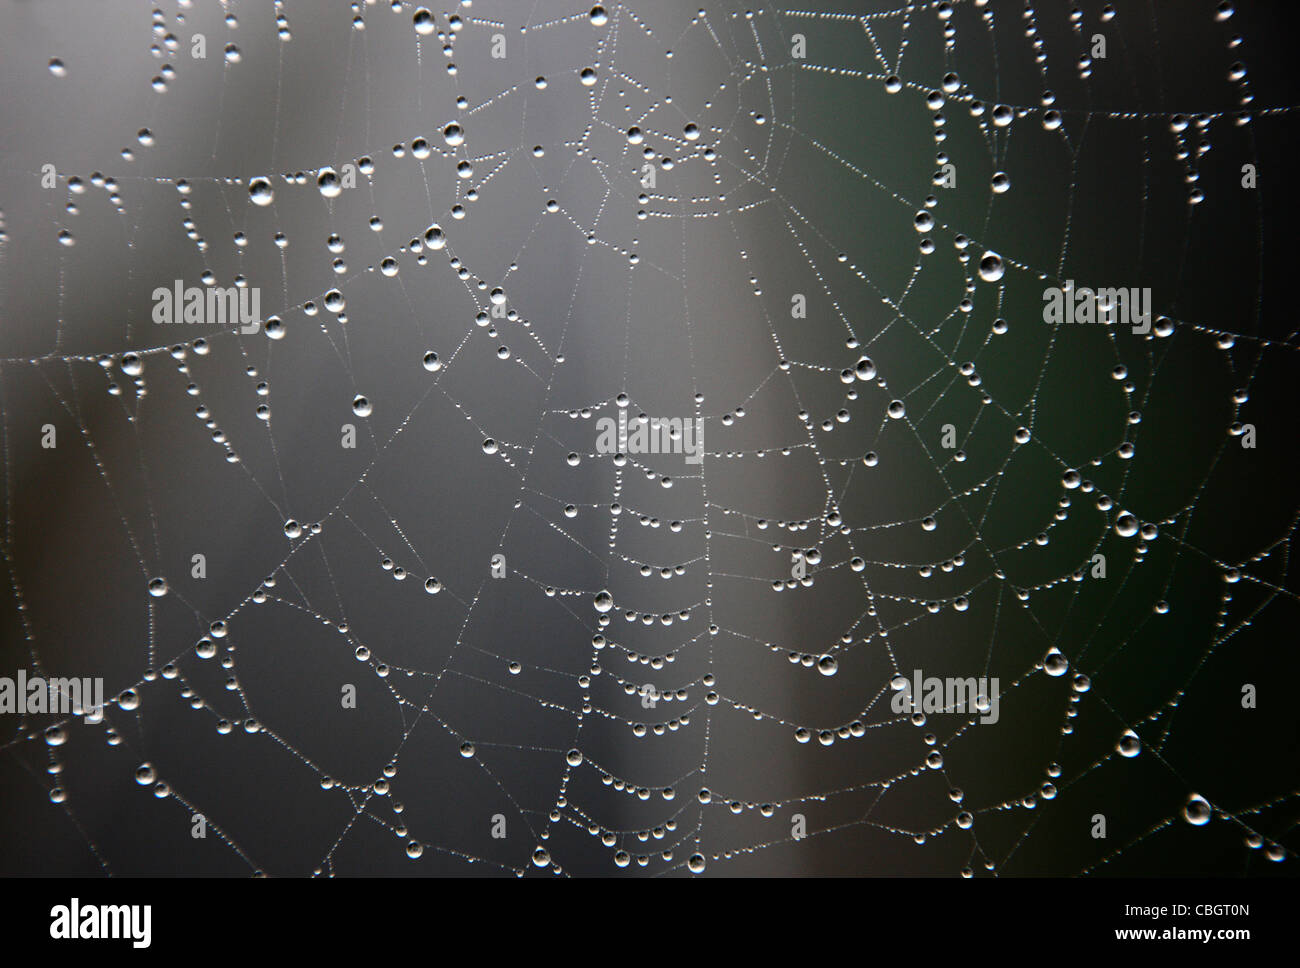 Spiderweb, wet with water drops. Stock Photo